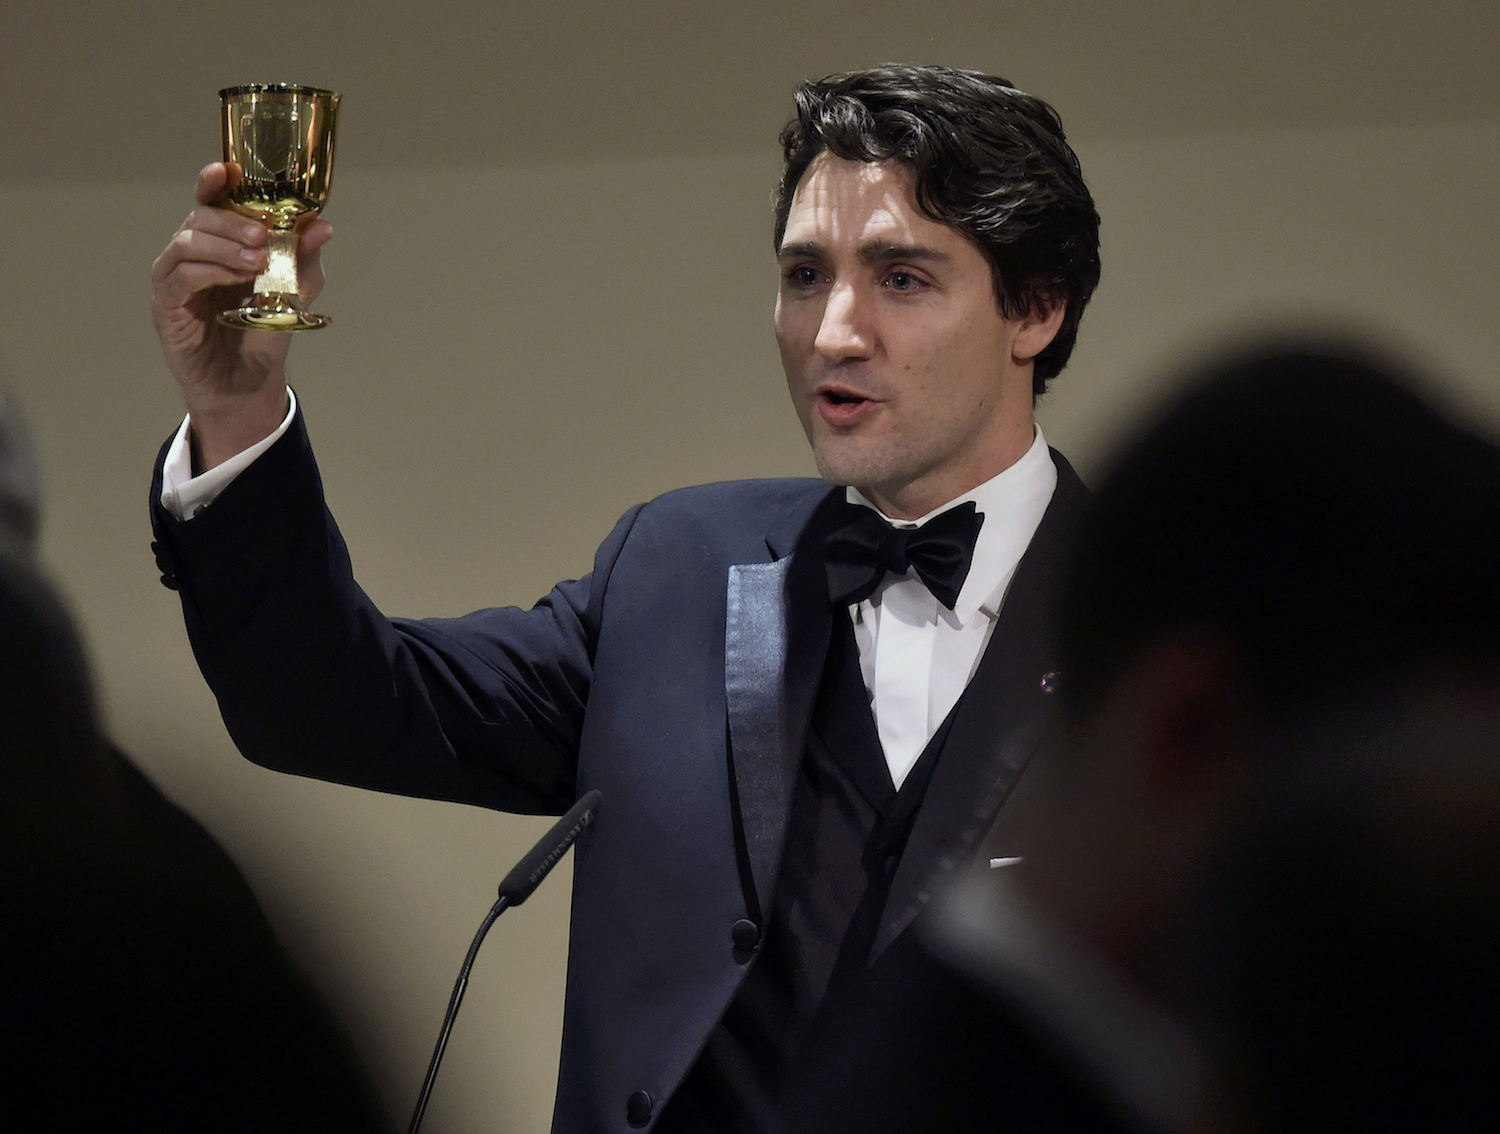 VALLETTA, MALTA - NOVEMBER 27: Canada's Prime Minister Justin Trudeau gives a toast as he attends a dinner at the Corinthia Palace Hotel in Attard during the Commonwealth Heads of Government Meeting (CHOGM) on November 27, 2015 near Valletta, Malta. Queen Elizabeth II, The Duke of Edinburgh, Prince Charles, Prince of Wales and Camilla, Duchess of Cornwall arrived today to attend the Commonwealth Heads of State Summit. (Photo by Toby Melville -Pool/Getty Images)